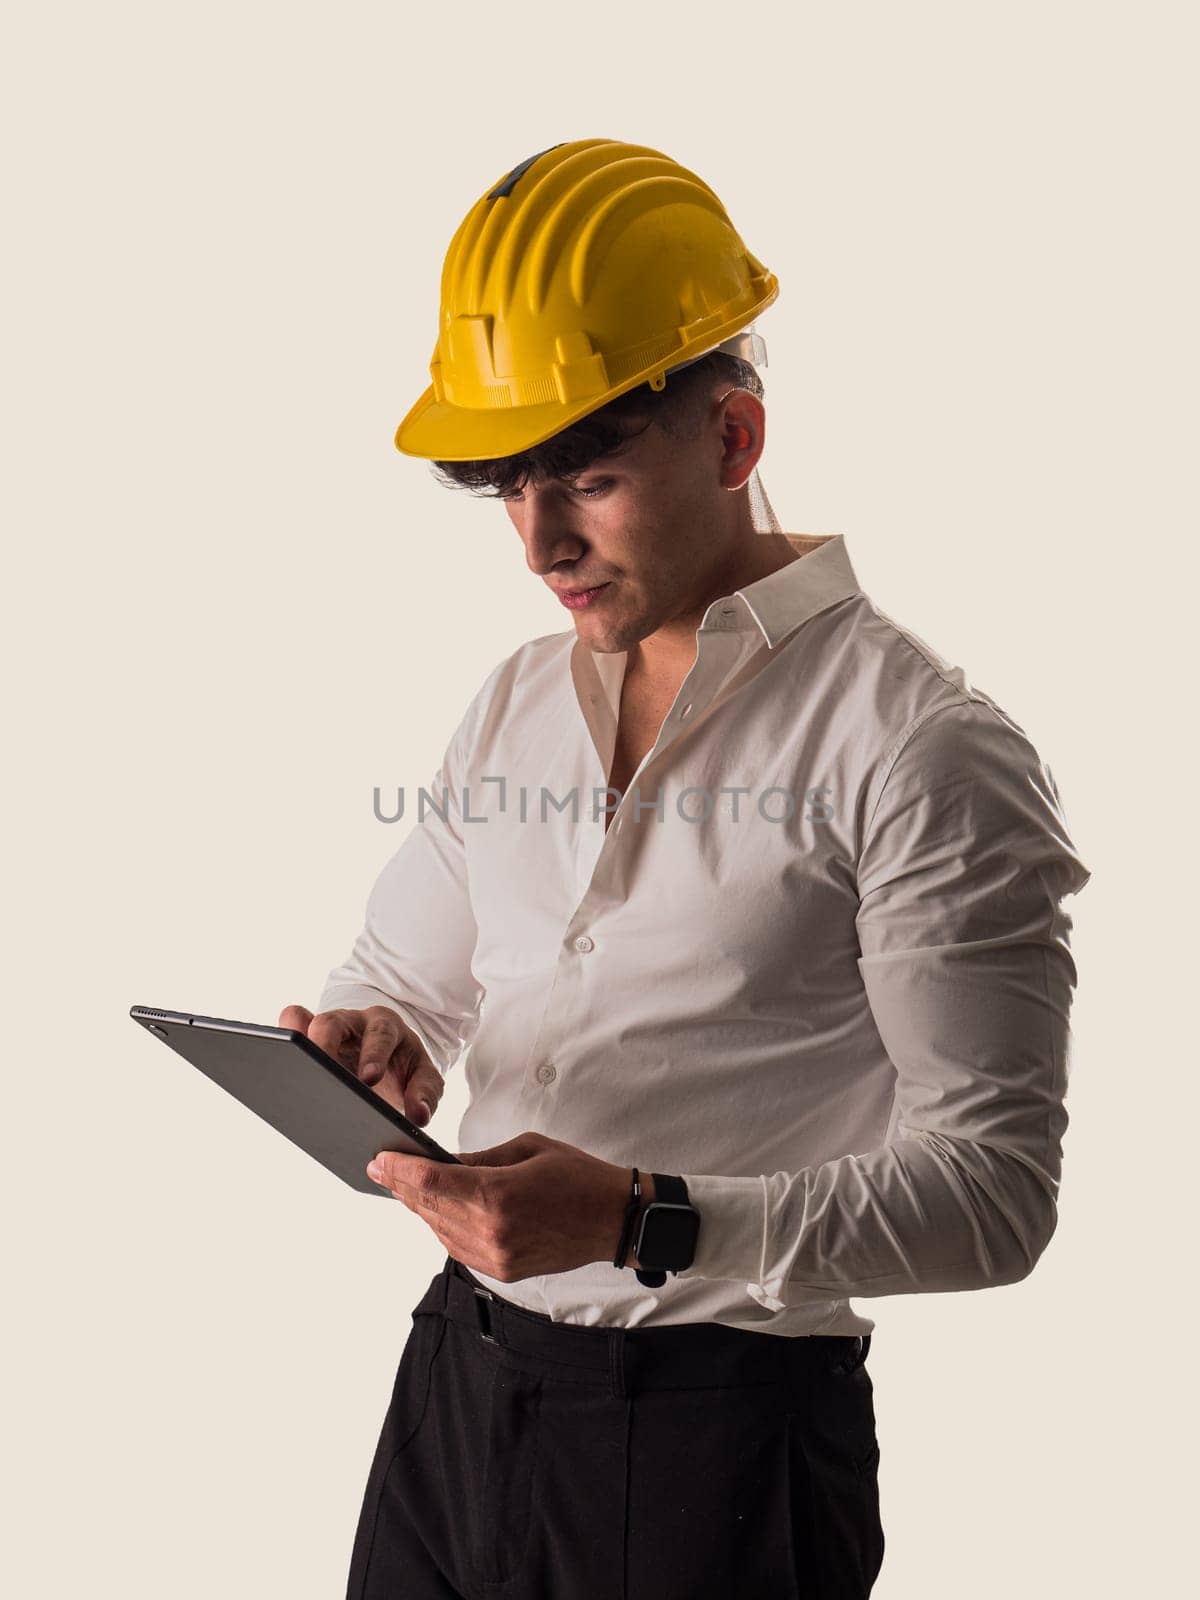 A Construction Worker Inspecting a Site With a Tablet by artofphoto